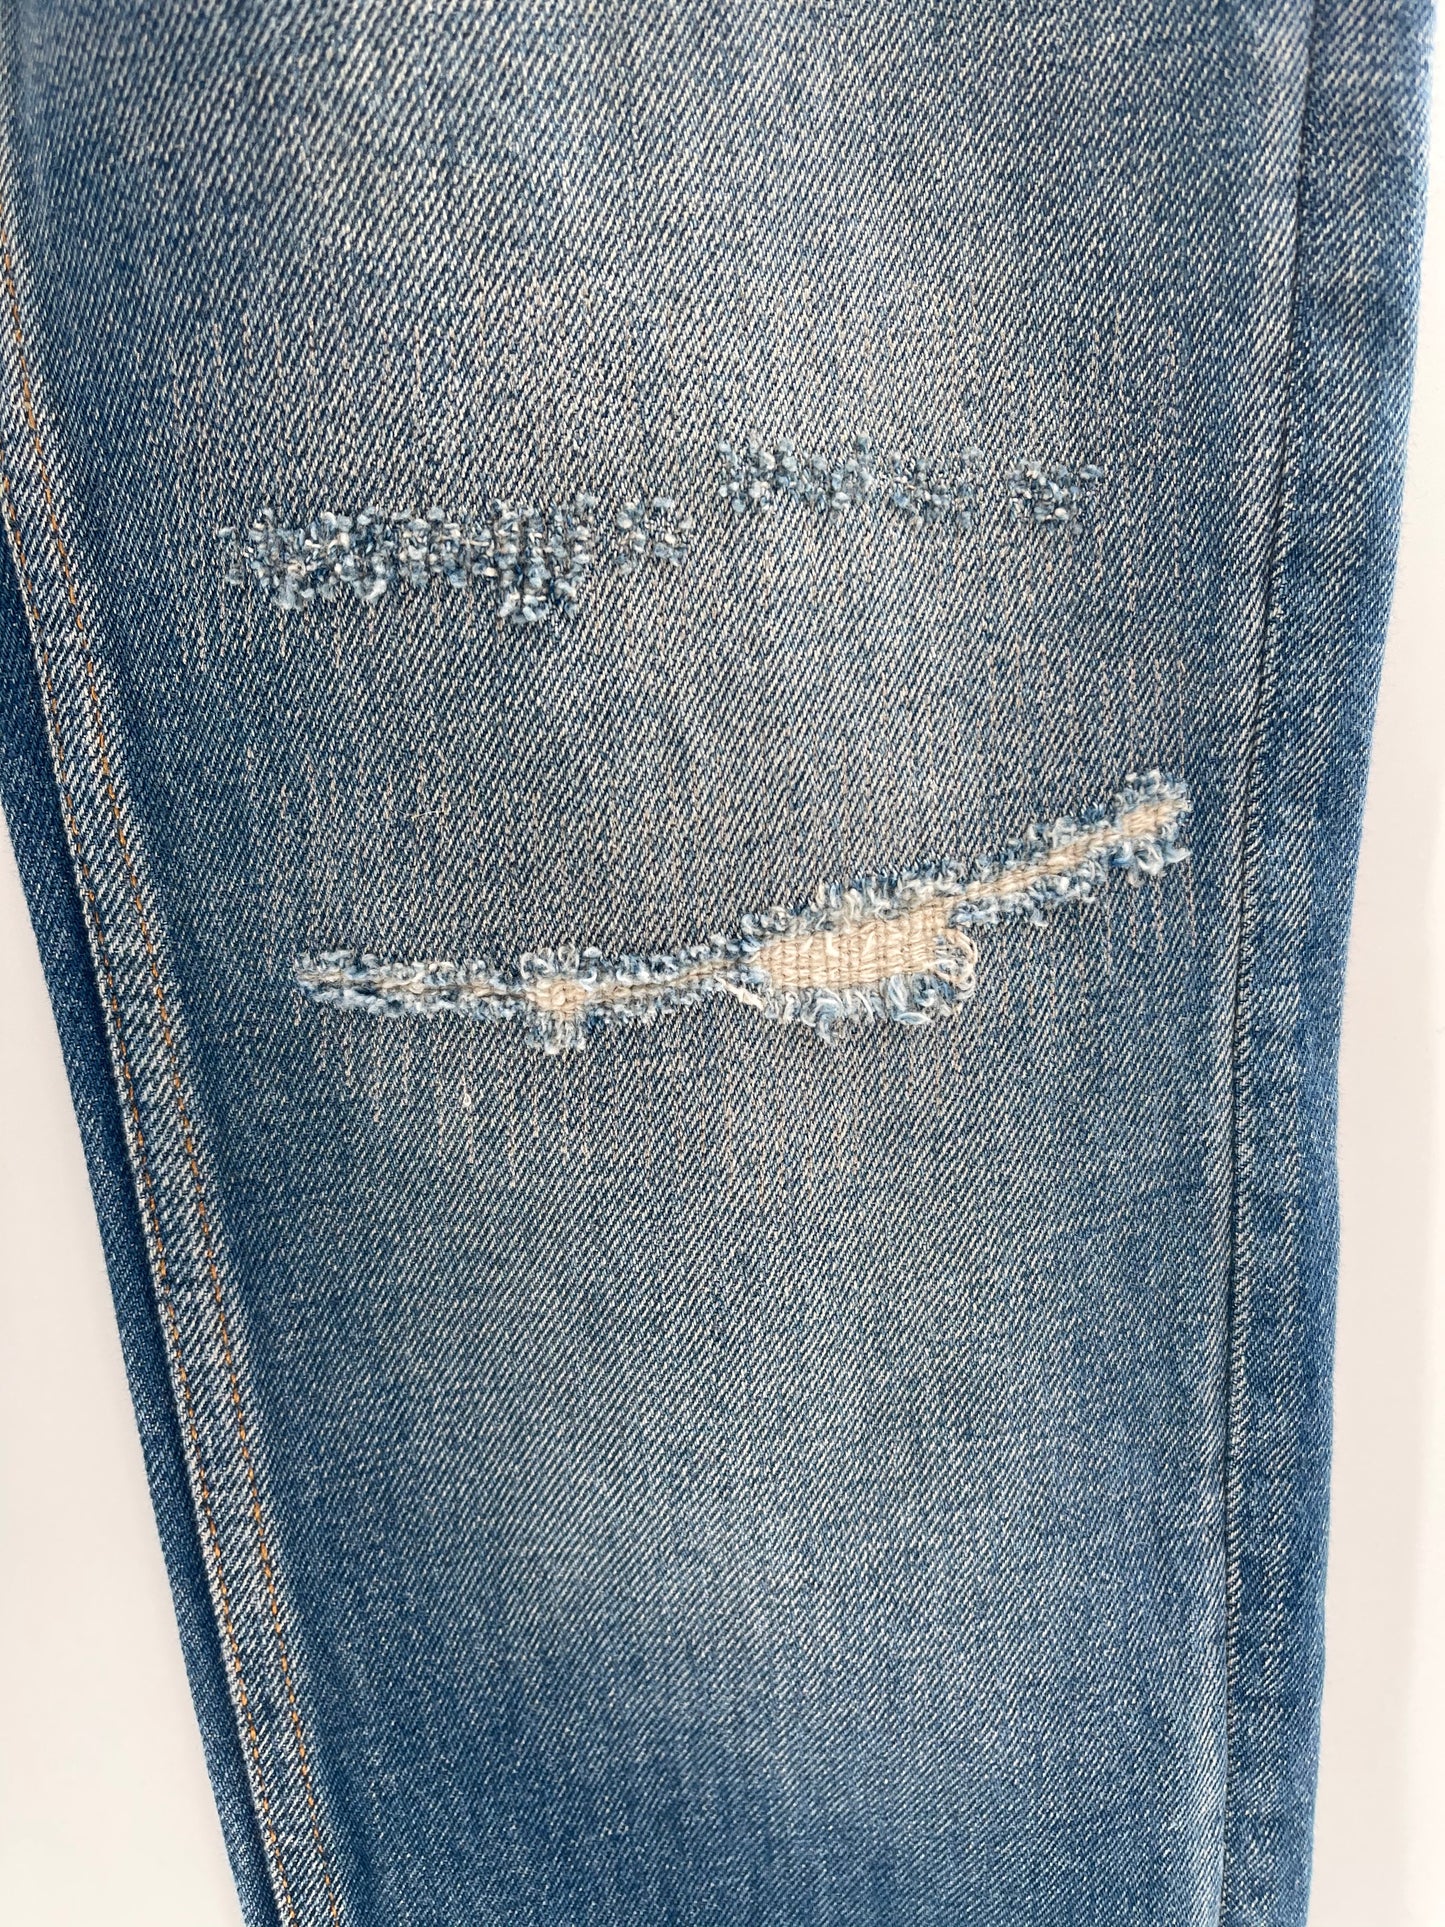 Free People Light Wash Ripped Jeans (size 26)